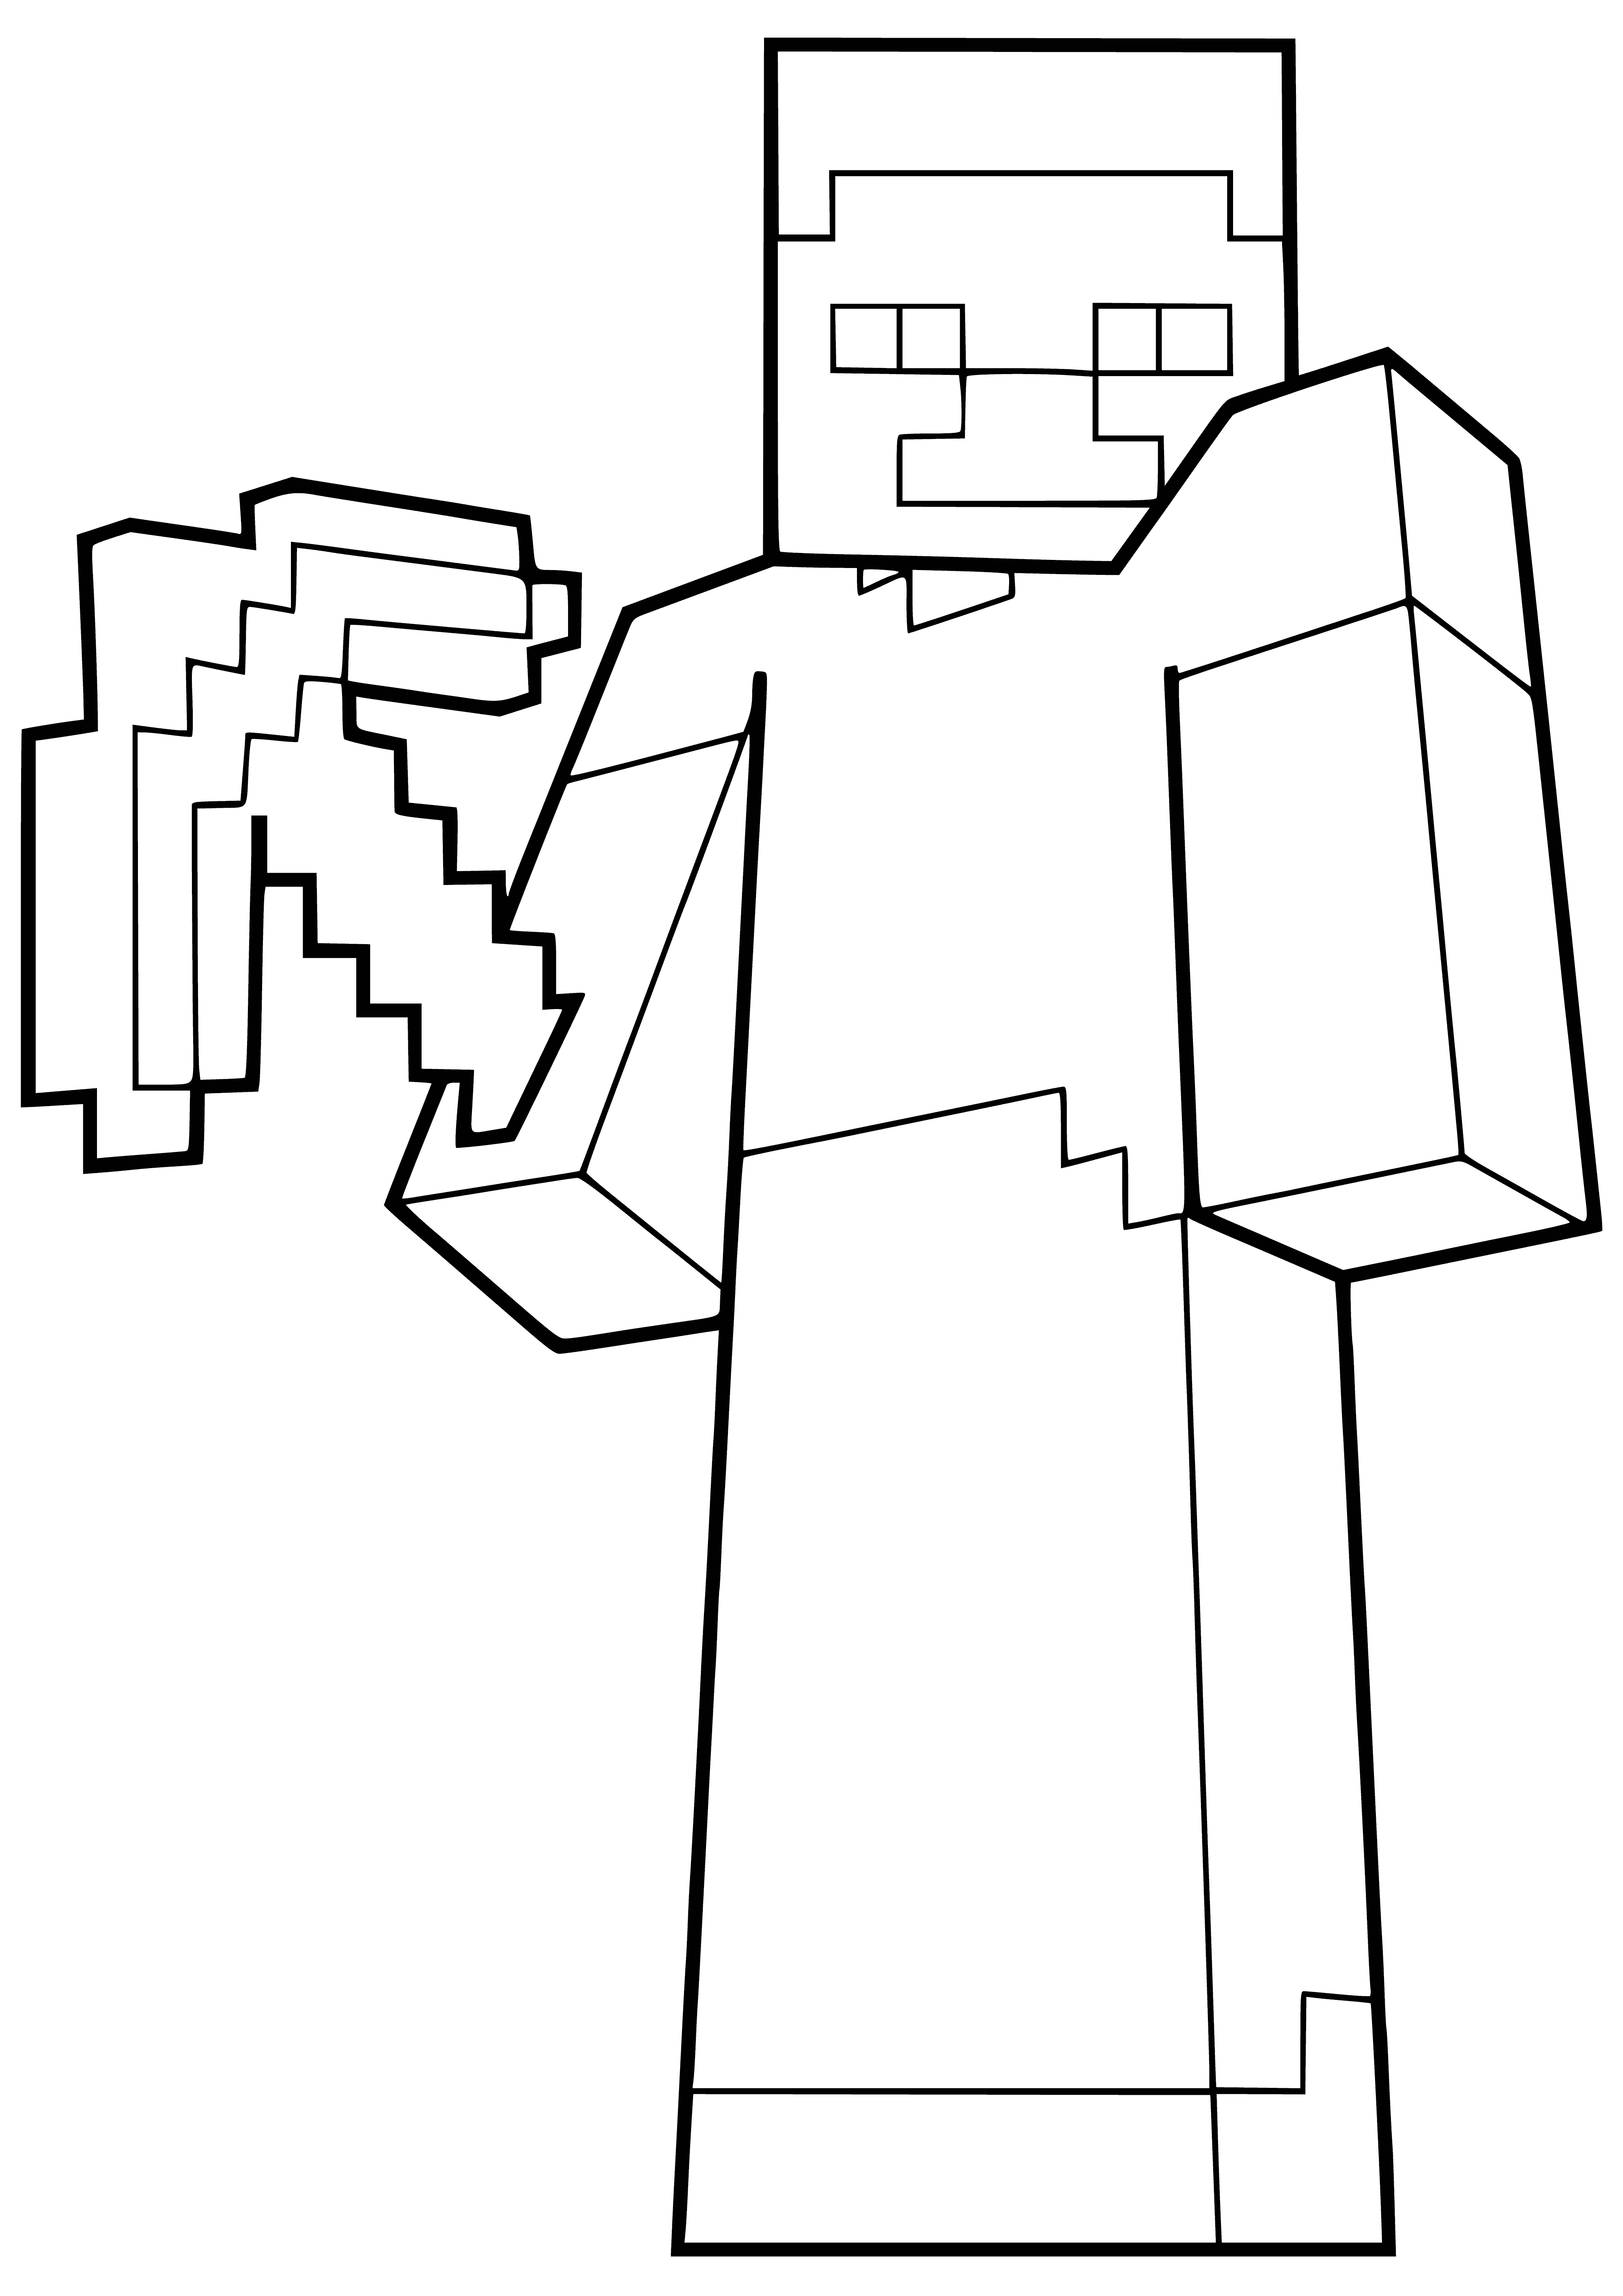 coloring page: A Minecraft player stands in grassy area with pickaxe, wearing blue jeans/white shirt & brown hair/beard. #minecraft #coloringpage